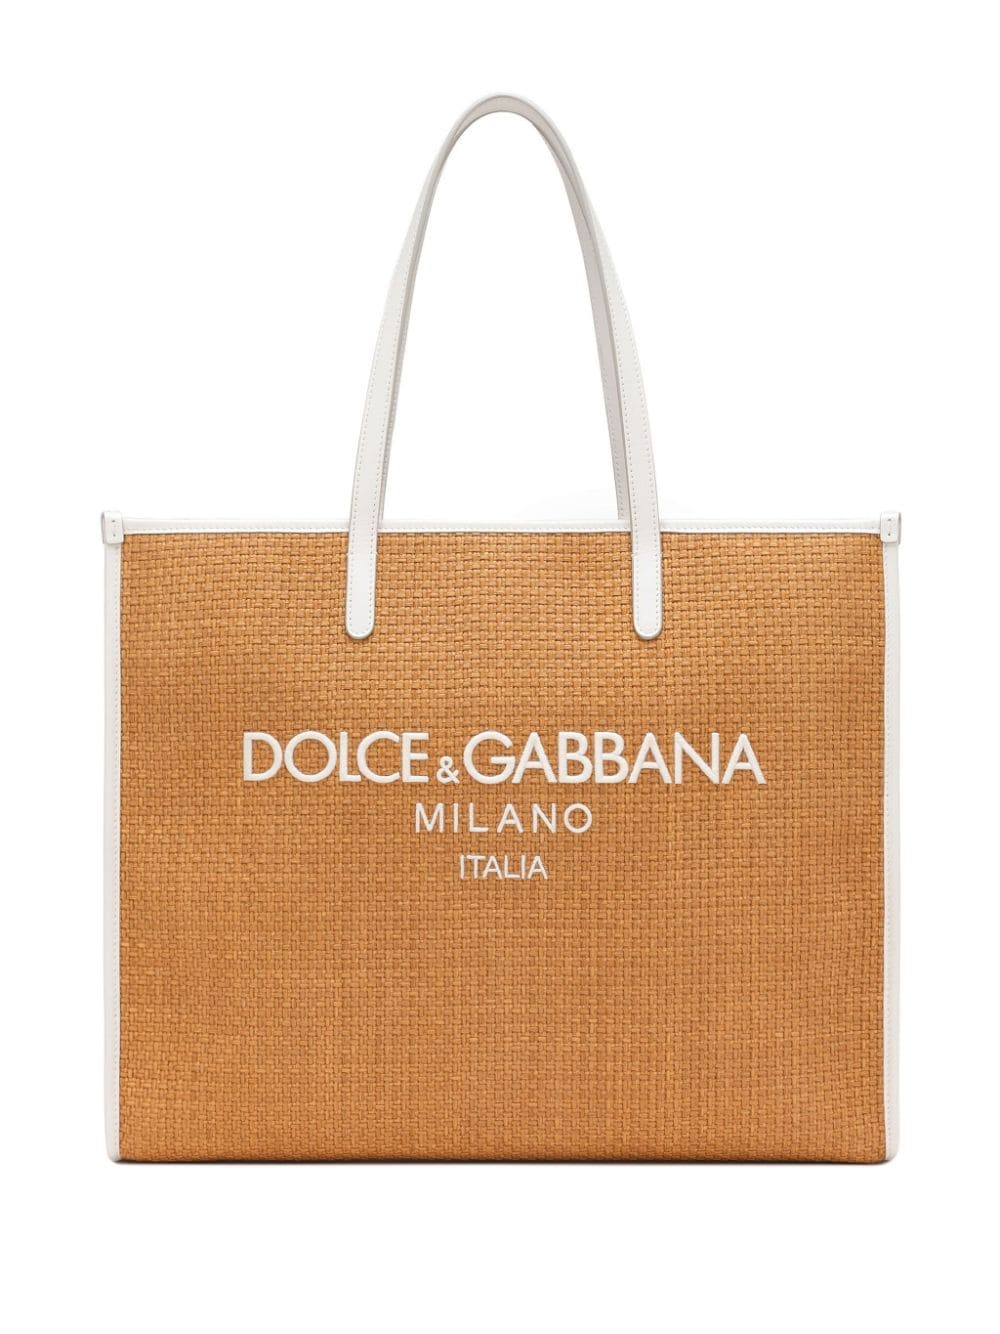 Shop Dolce & Gabbana Luxurious Woven Tote Handbag With Leather Trim In Rich Caramel Brown And Milk White In Tan